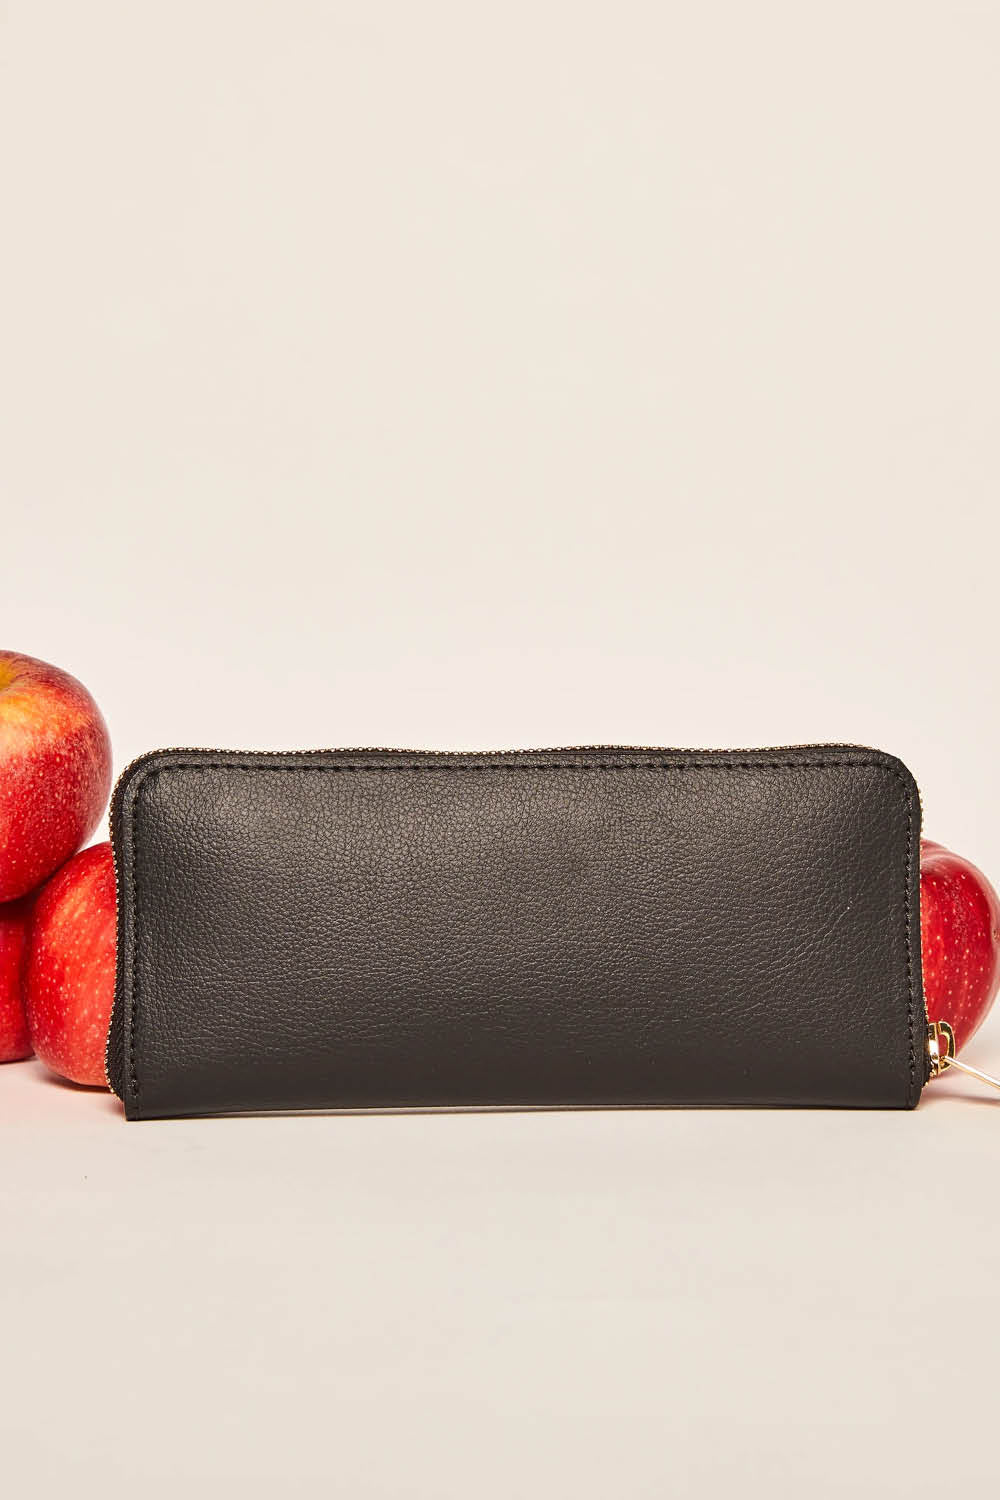 Gala Long Wallet in Black and Seaglass